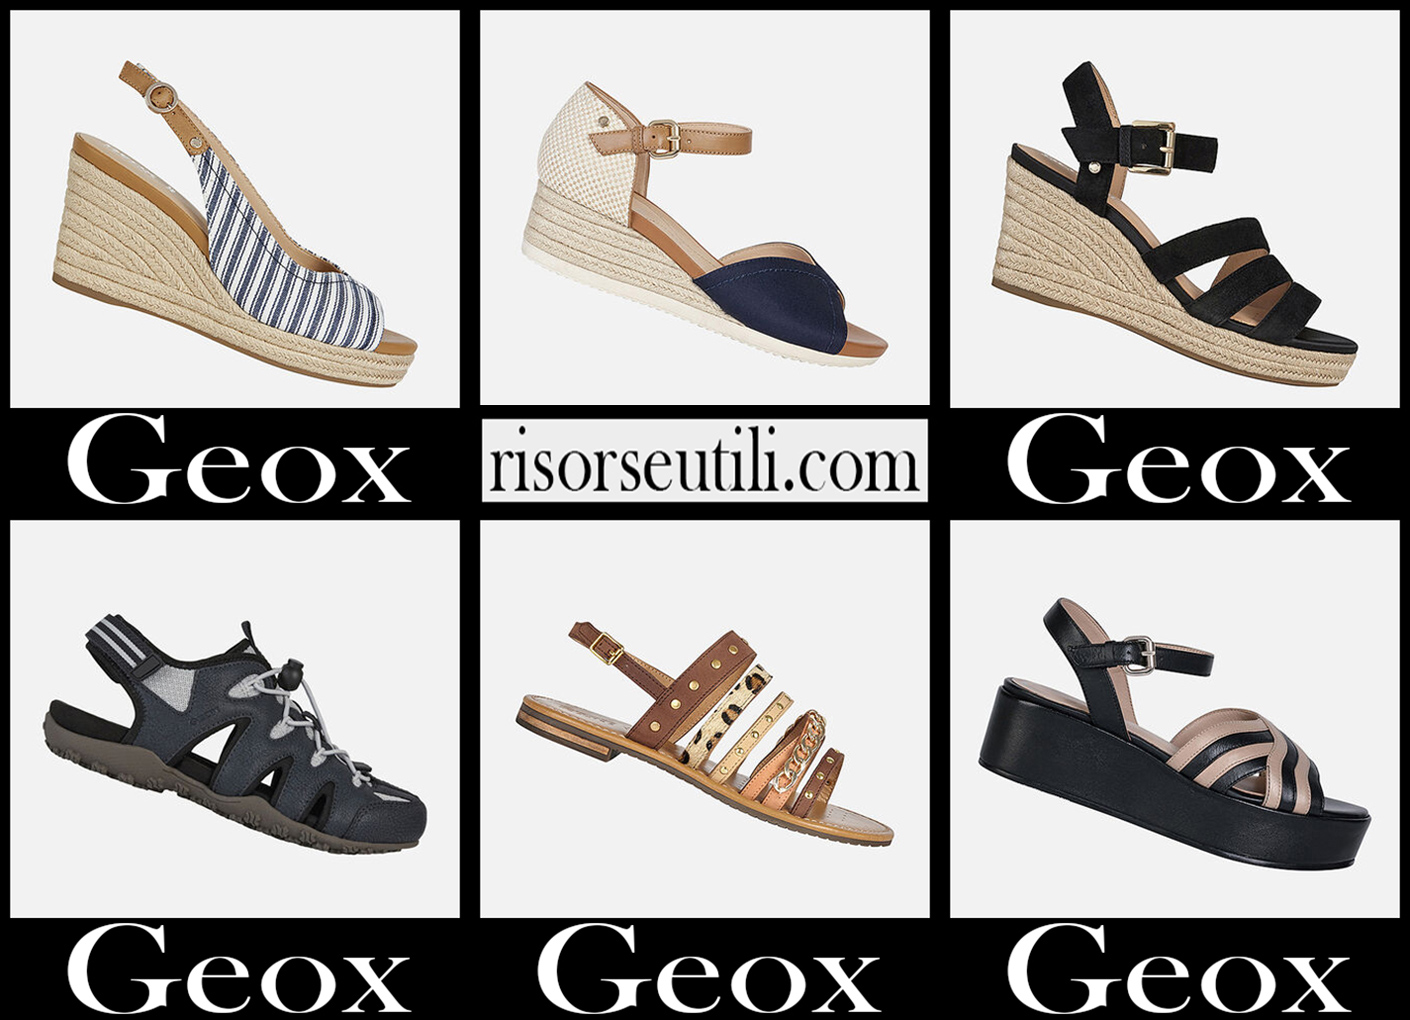 New arrivals Geox sandals 2021 womens shoes look